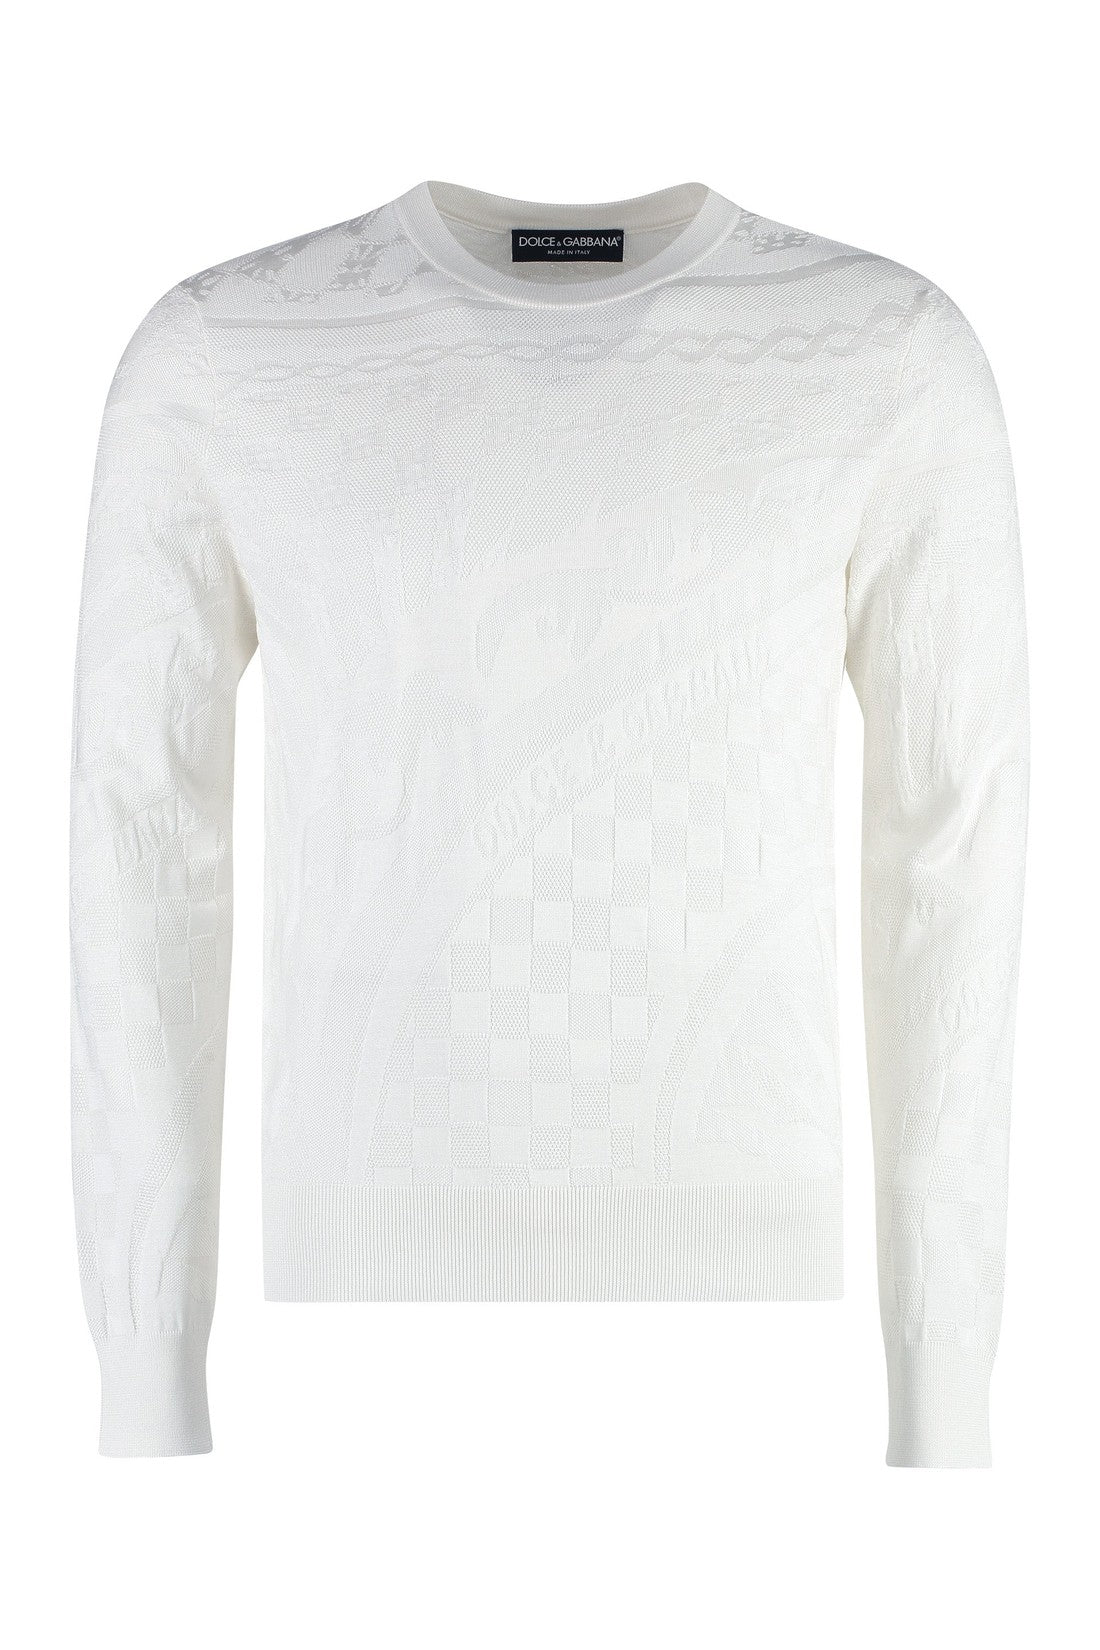 Dolce & Gabbana-OUTLET-SALE-Long sleeve crew-neck sweater-ARCHIVIST